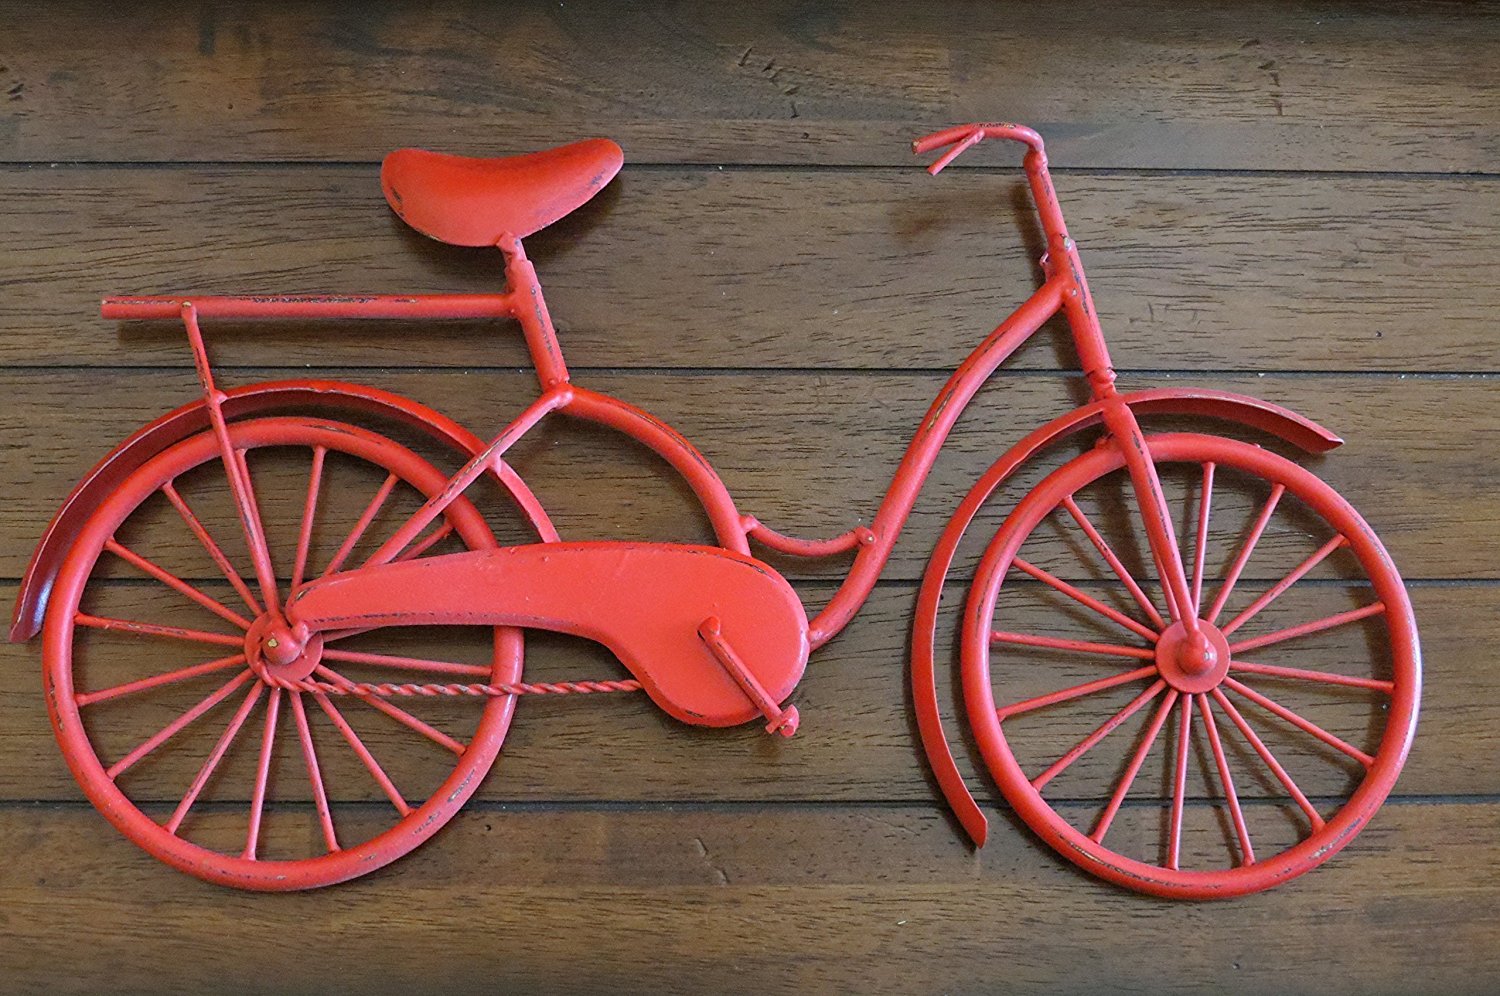 Bike Wall Decor/ Apple Red or Pick Your Color/ Bicycle Metal Wall Decor/ Unique Wall Idea/ Metal Wall Hanging